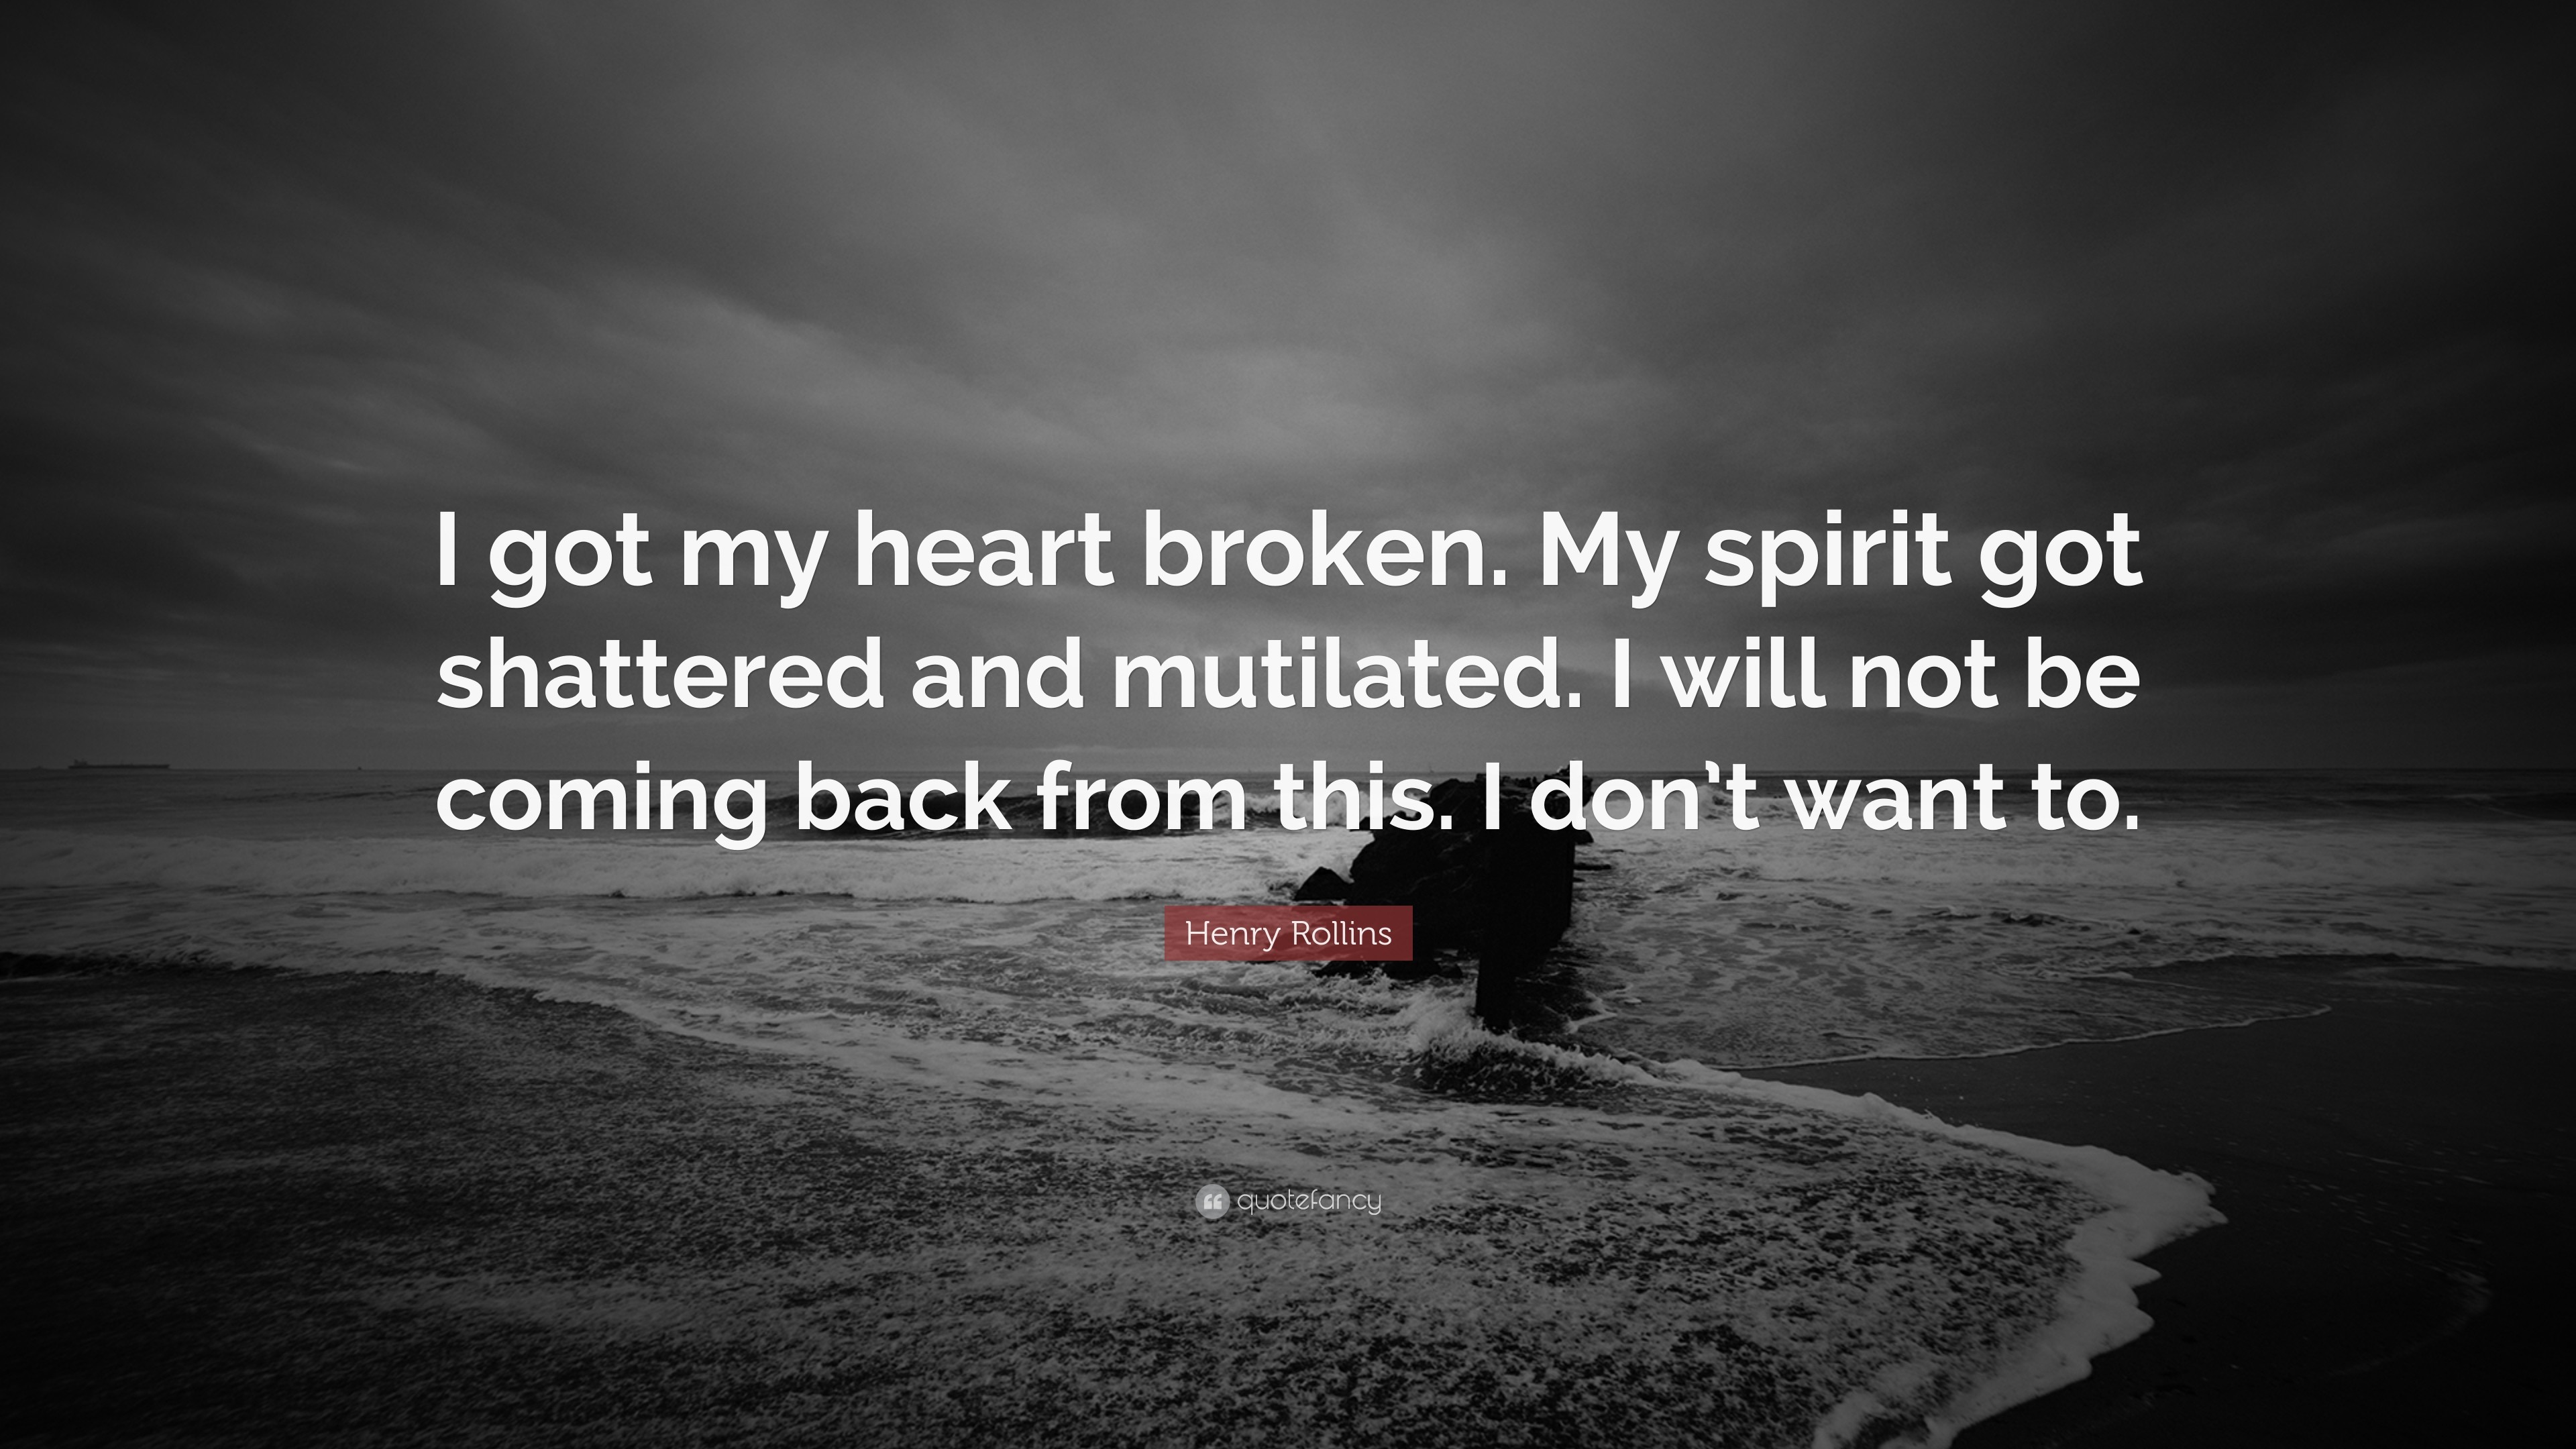 3840x2160 Henry Rollins Quote: “I got my heart broken. My spirit got shattered and